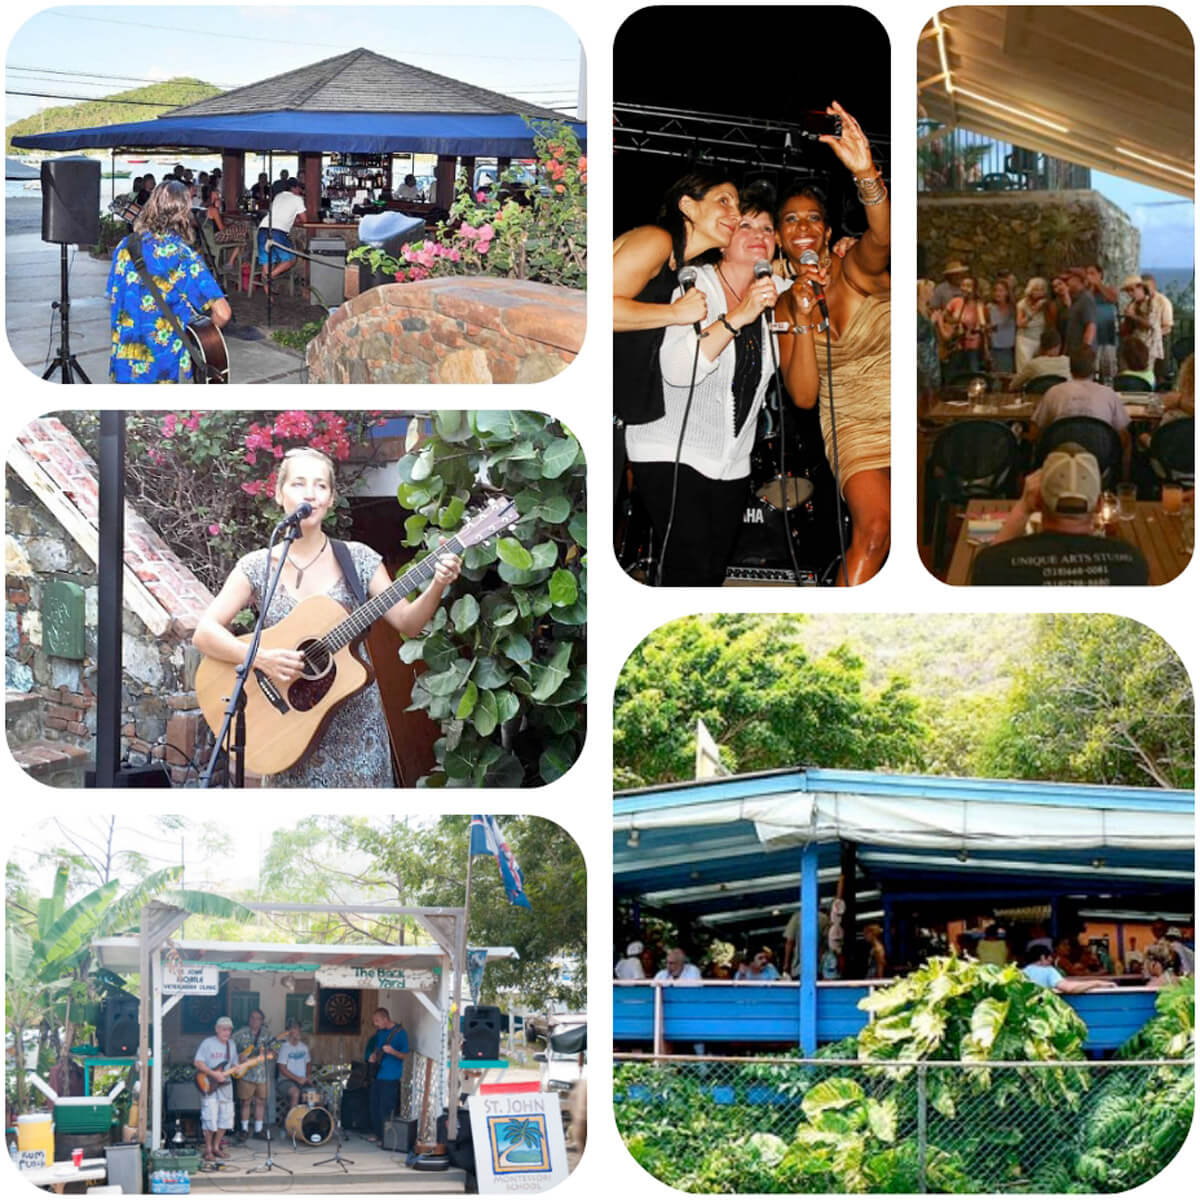 Music and Fun in Coral Bay, St John